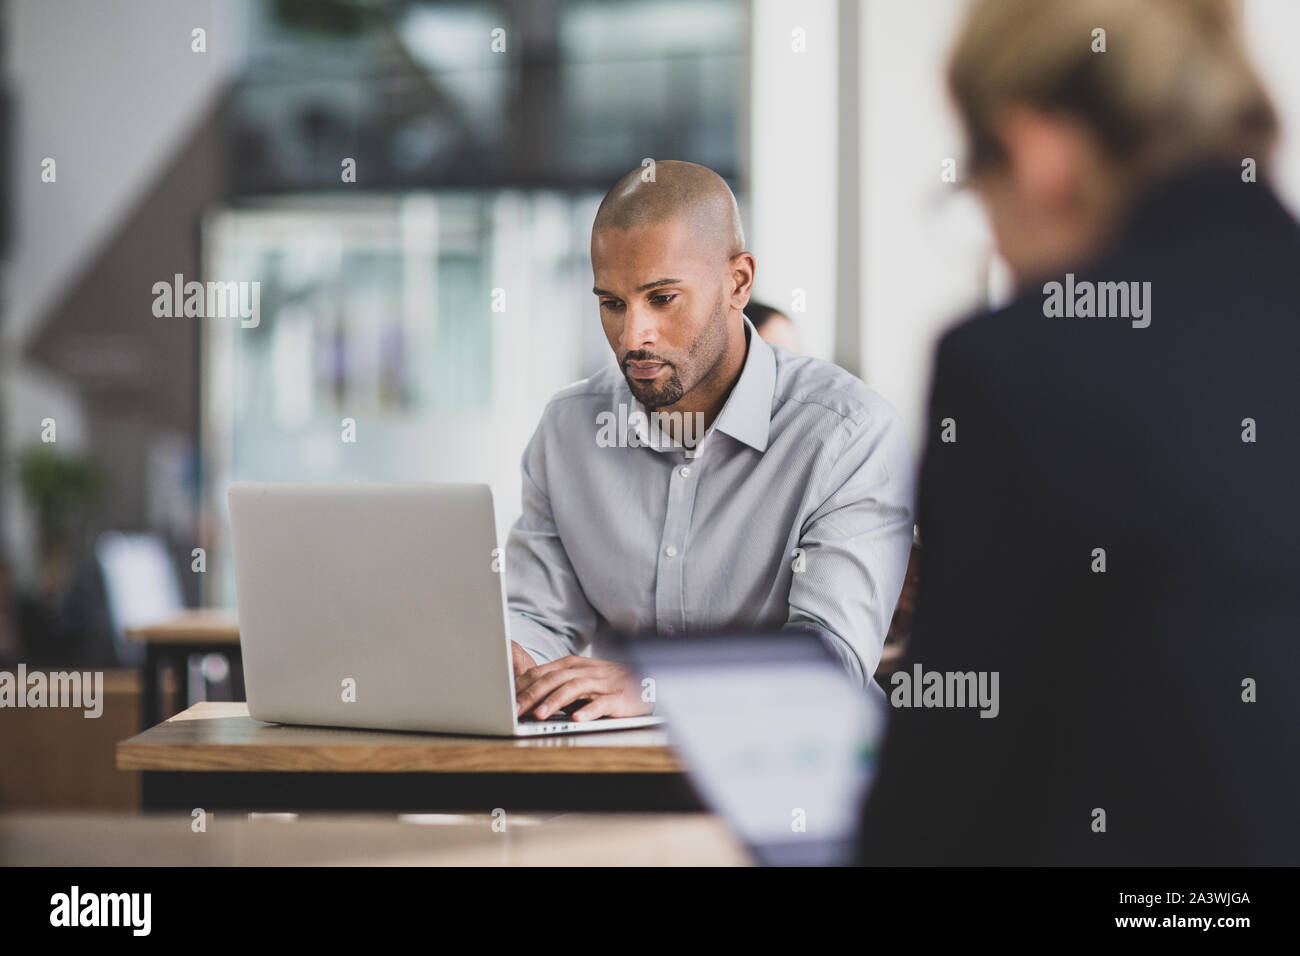 Businessman in a cafÃ© using a laptop Stock Photo